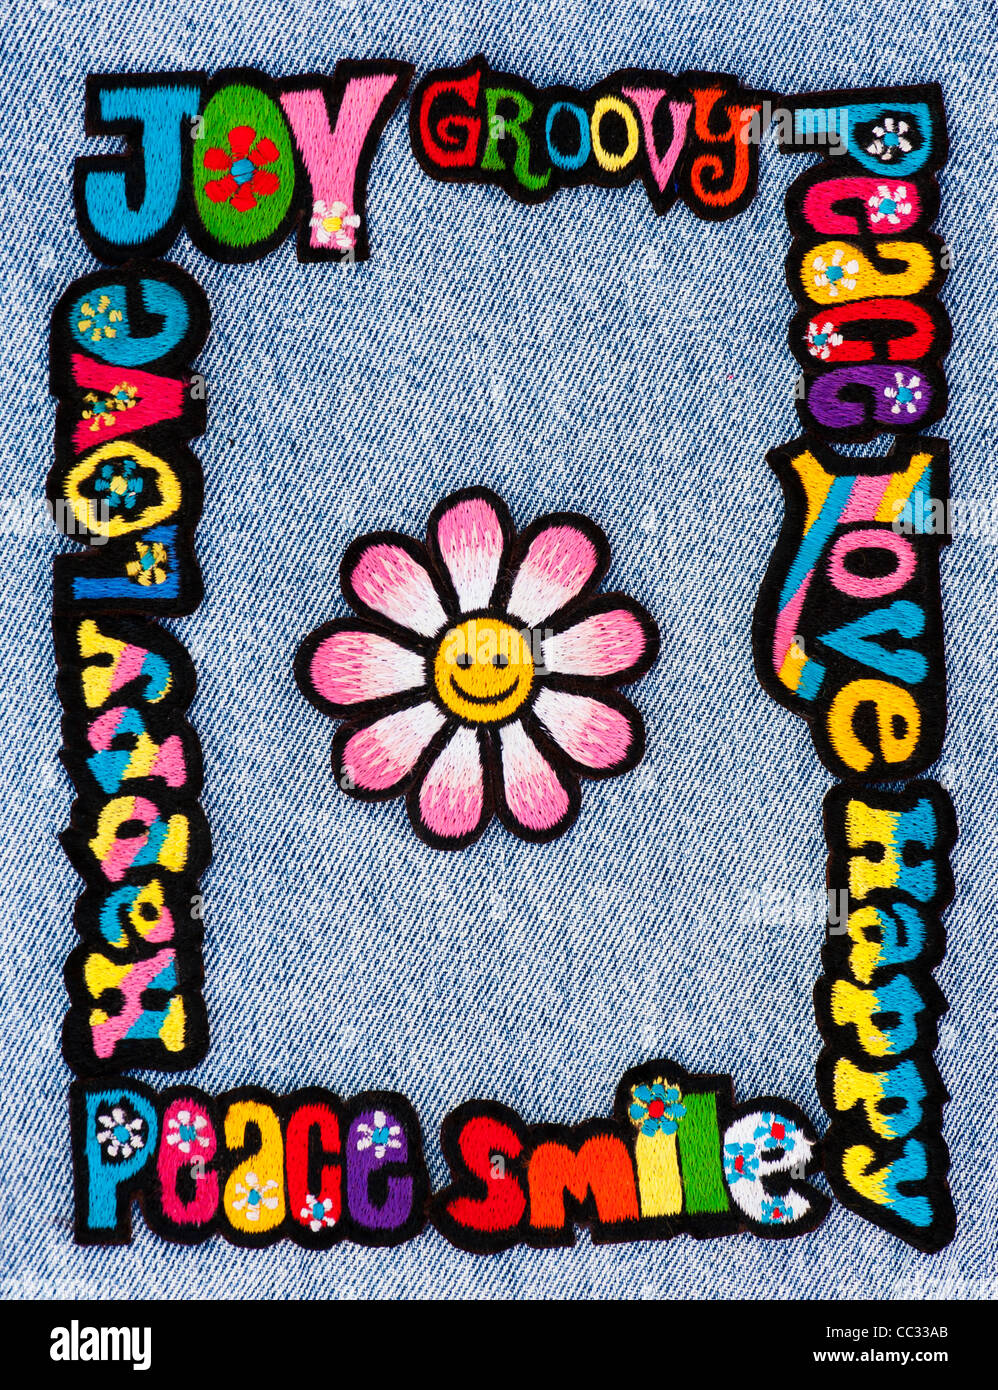 Embroidery iron on patches of Multicoloured Love, Peace, Happy words with a smiley face flower on a denim jean background Stock Photo